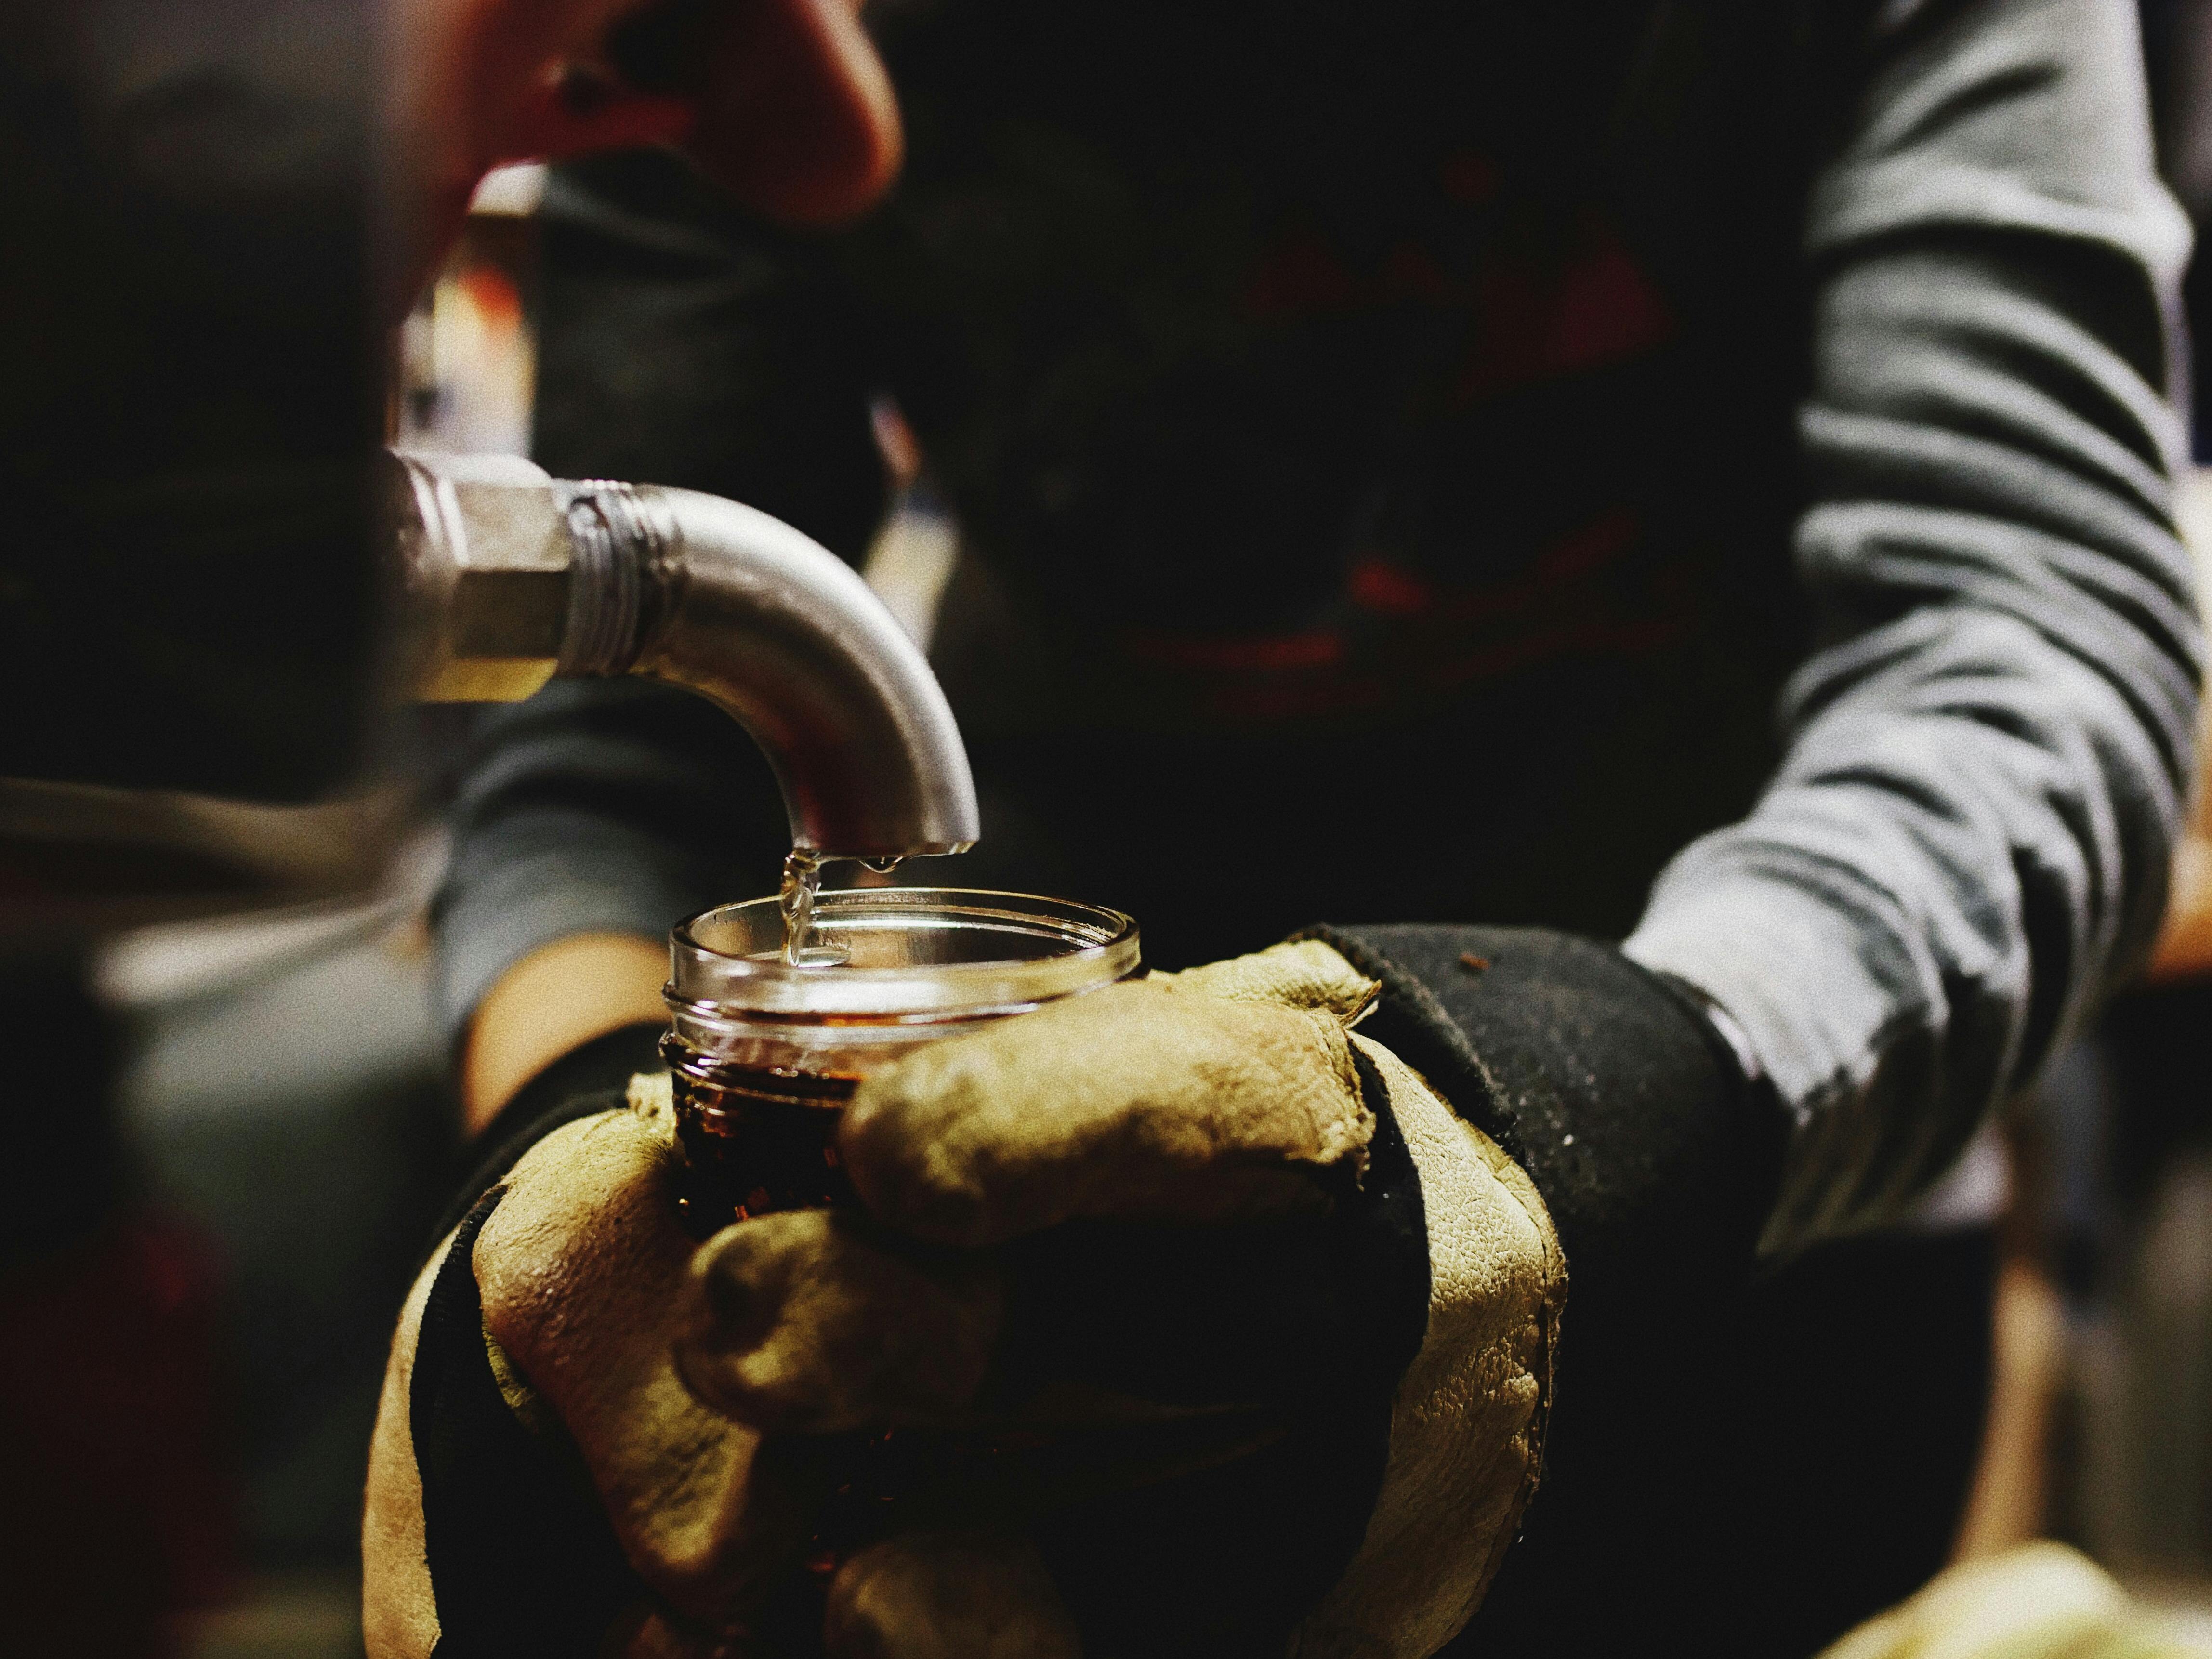 Person wearing gloves holding a jar and filling up with maple syrup from a tap.